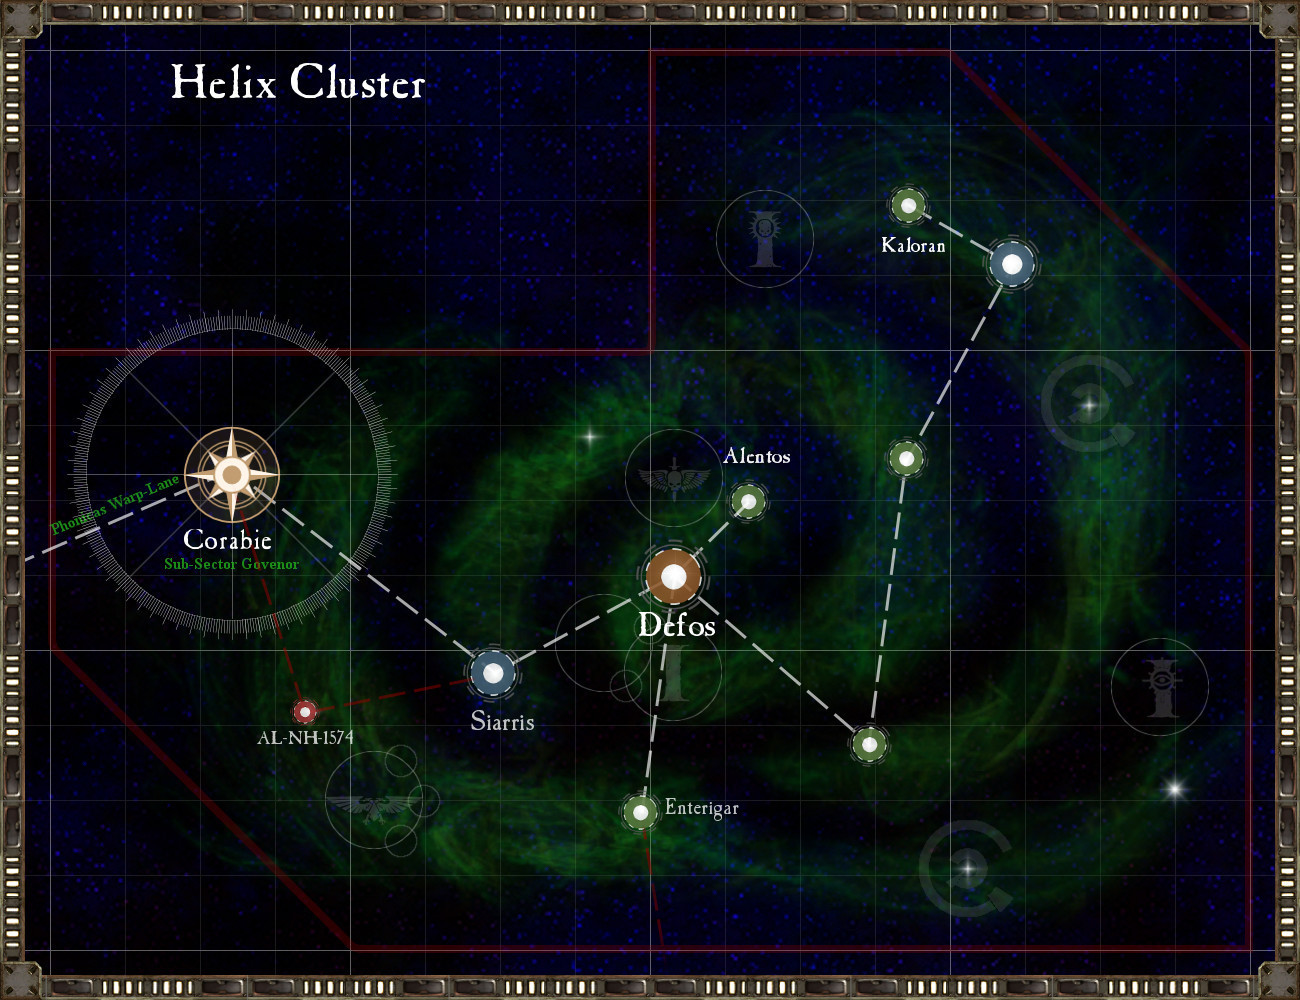 Helix Cluster